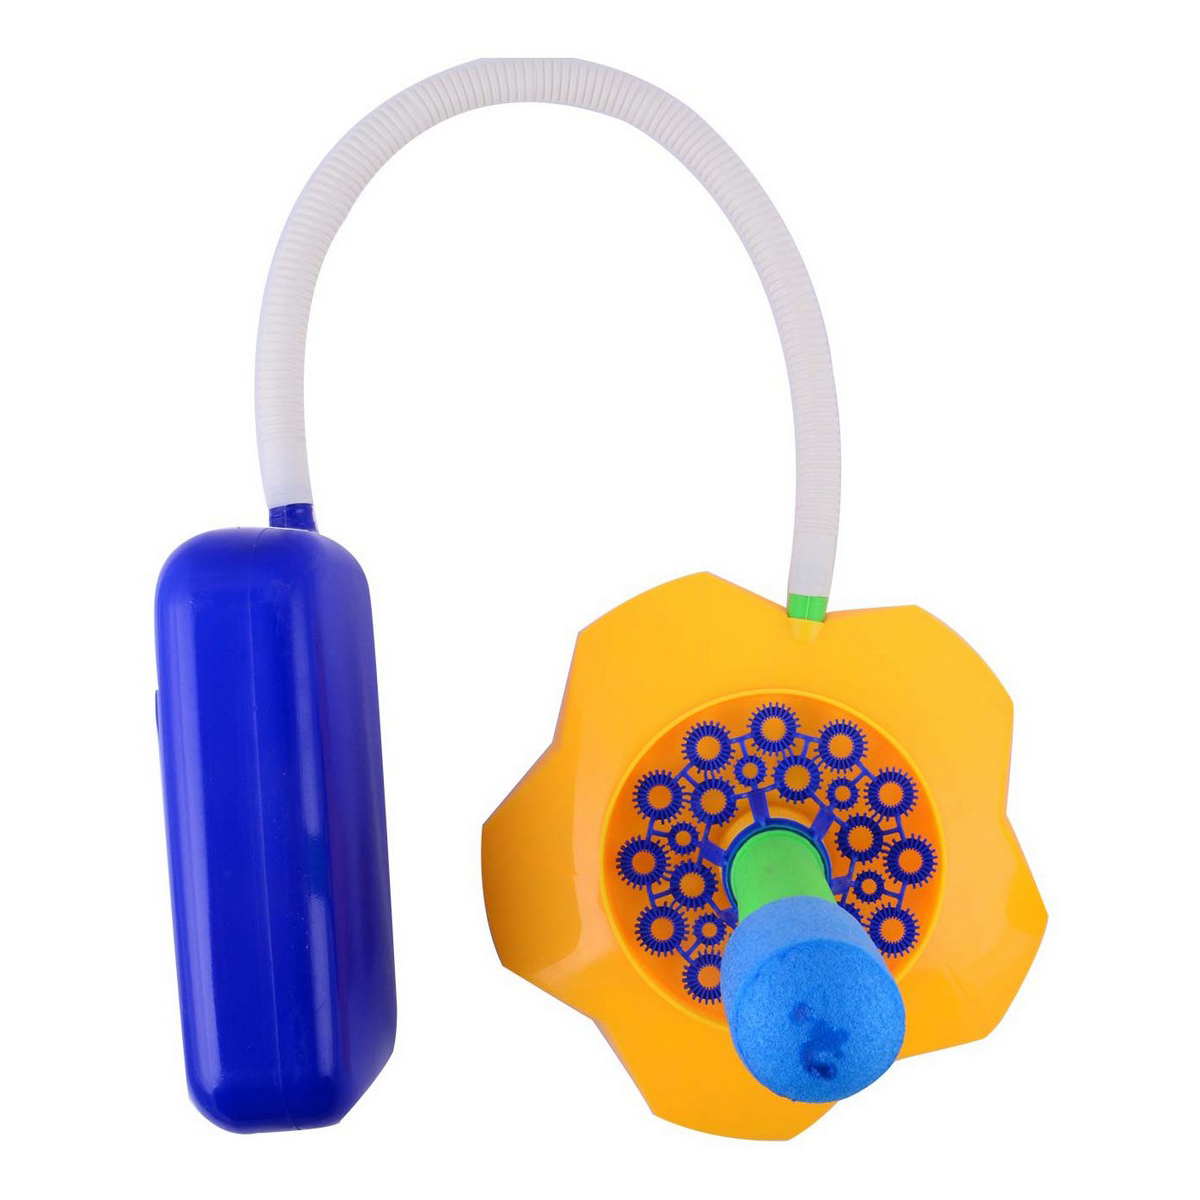 Bubble Rocket Toy for Kids